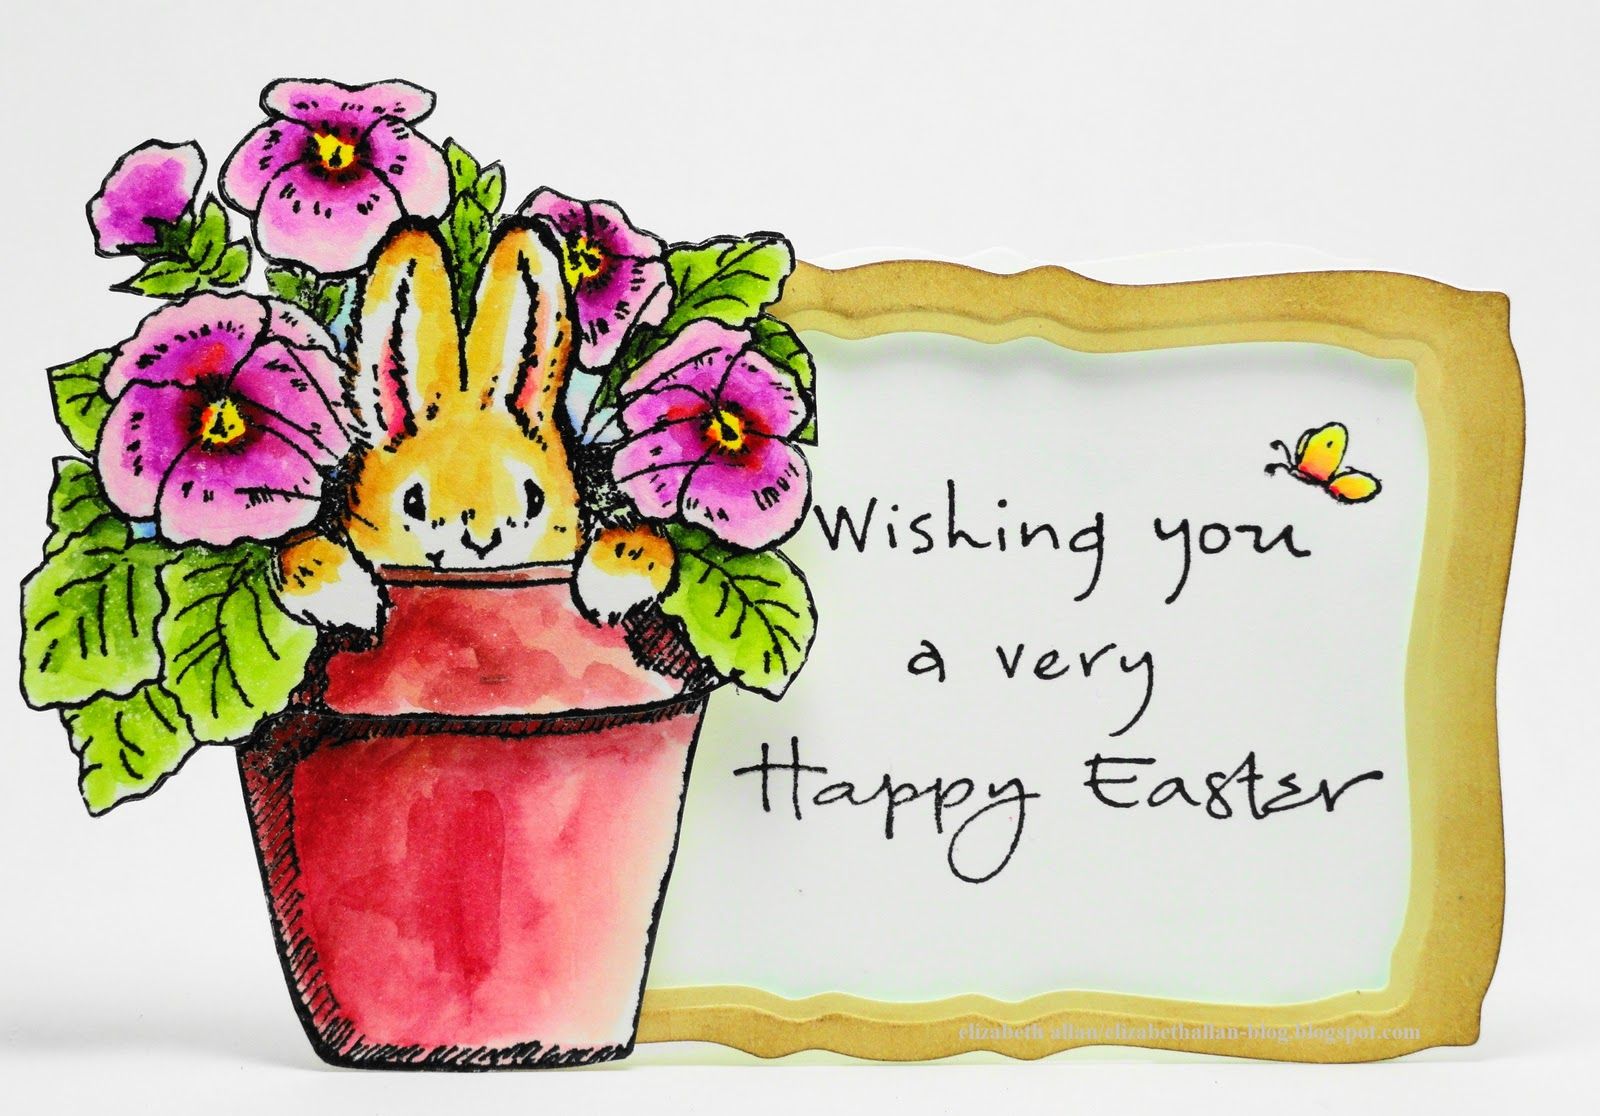 Happy Easter Day 2020.. Download 2020 Wishes Image